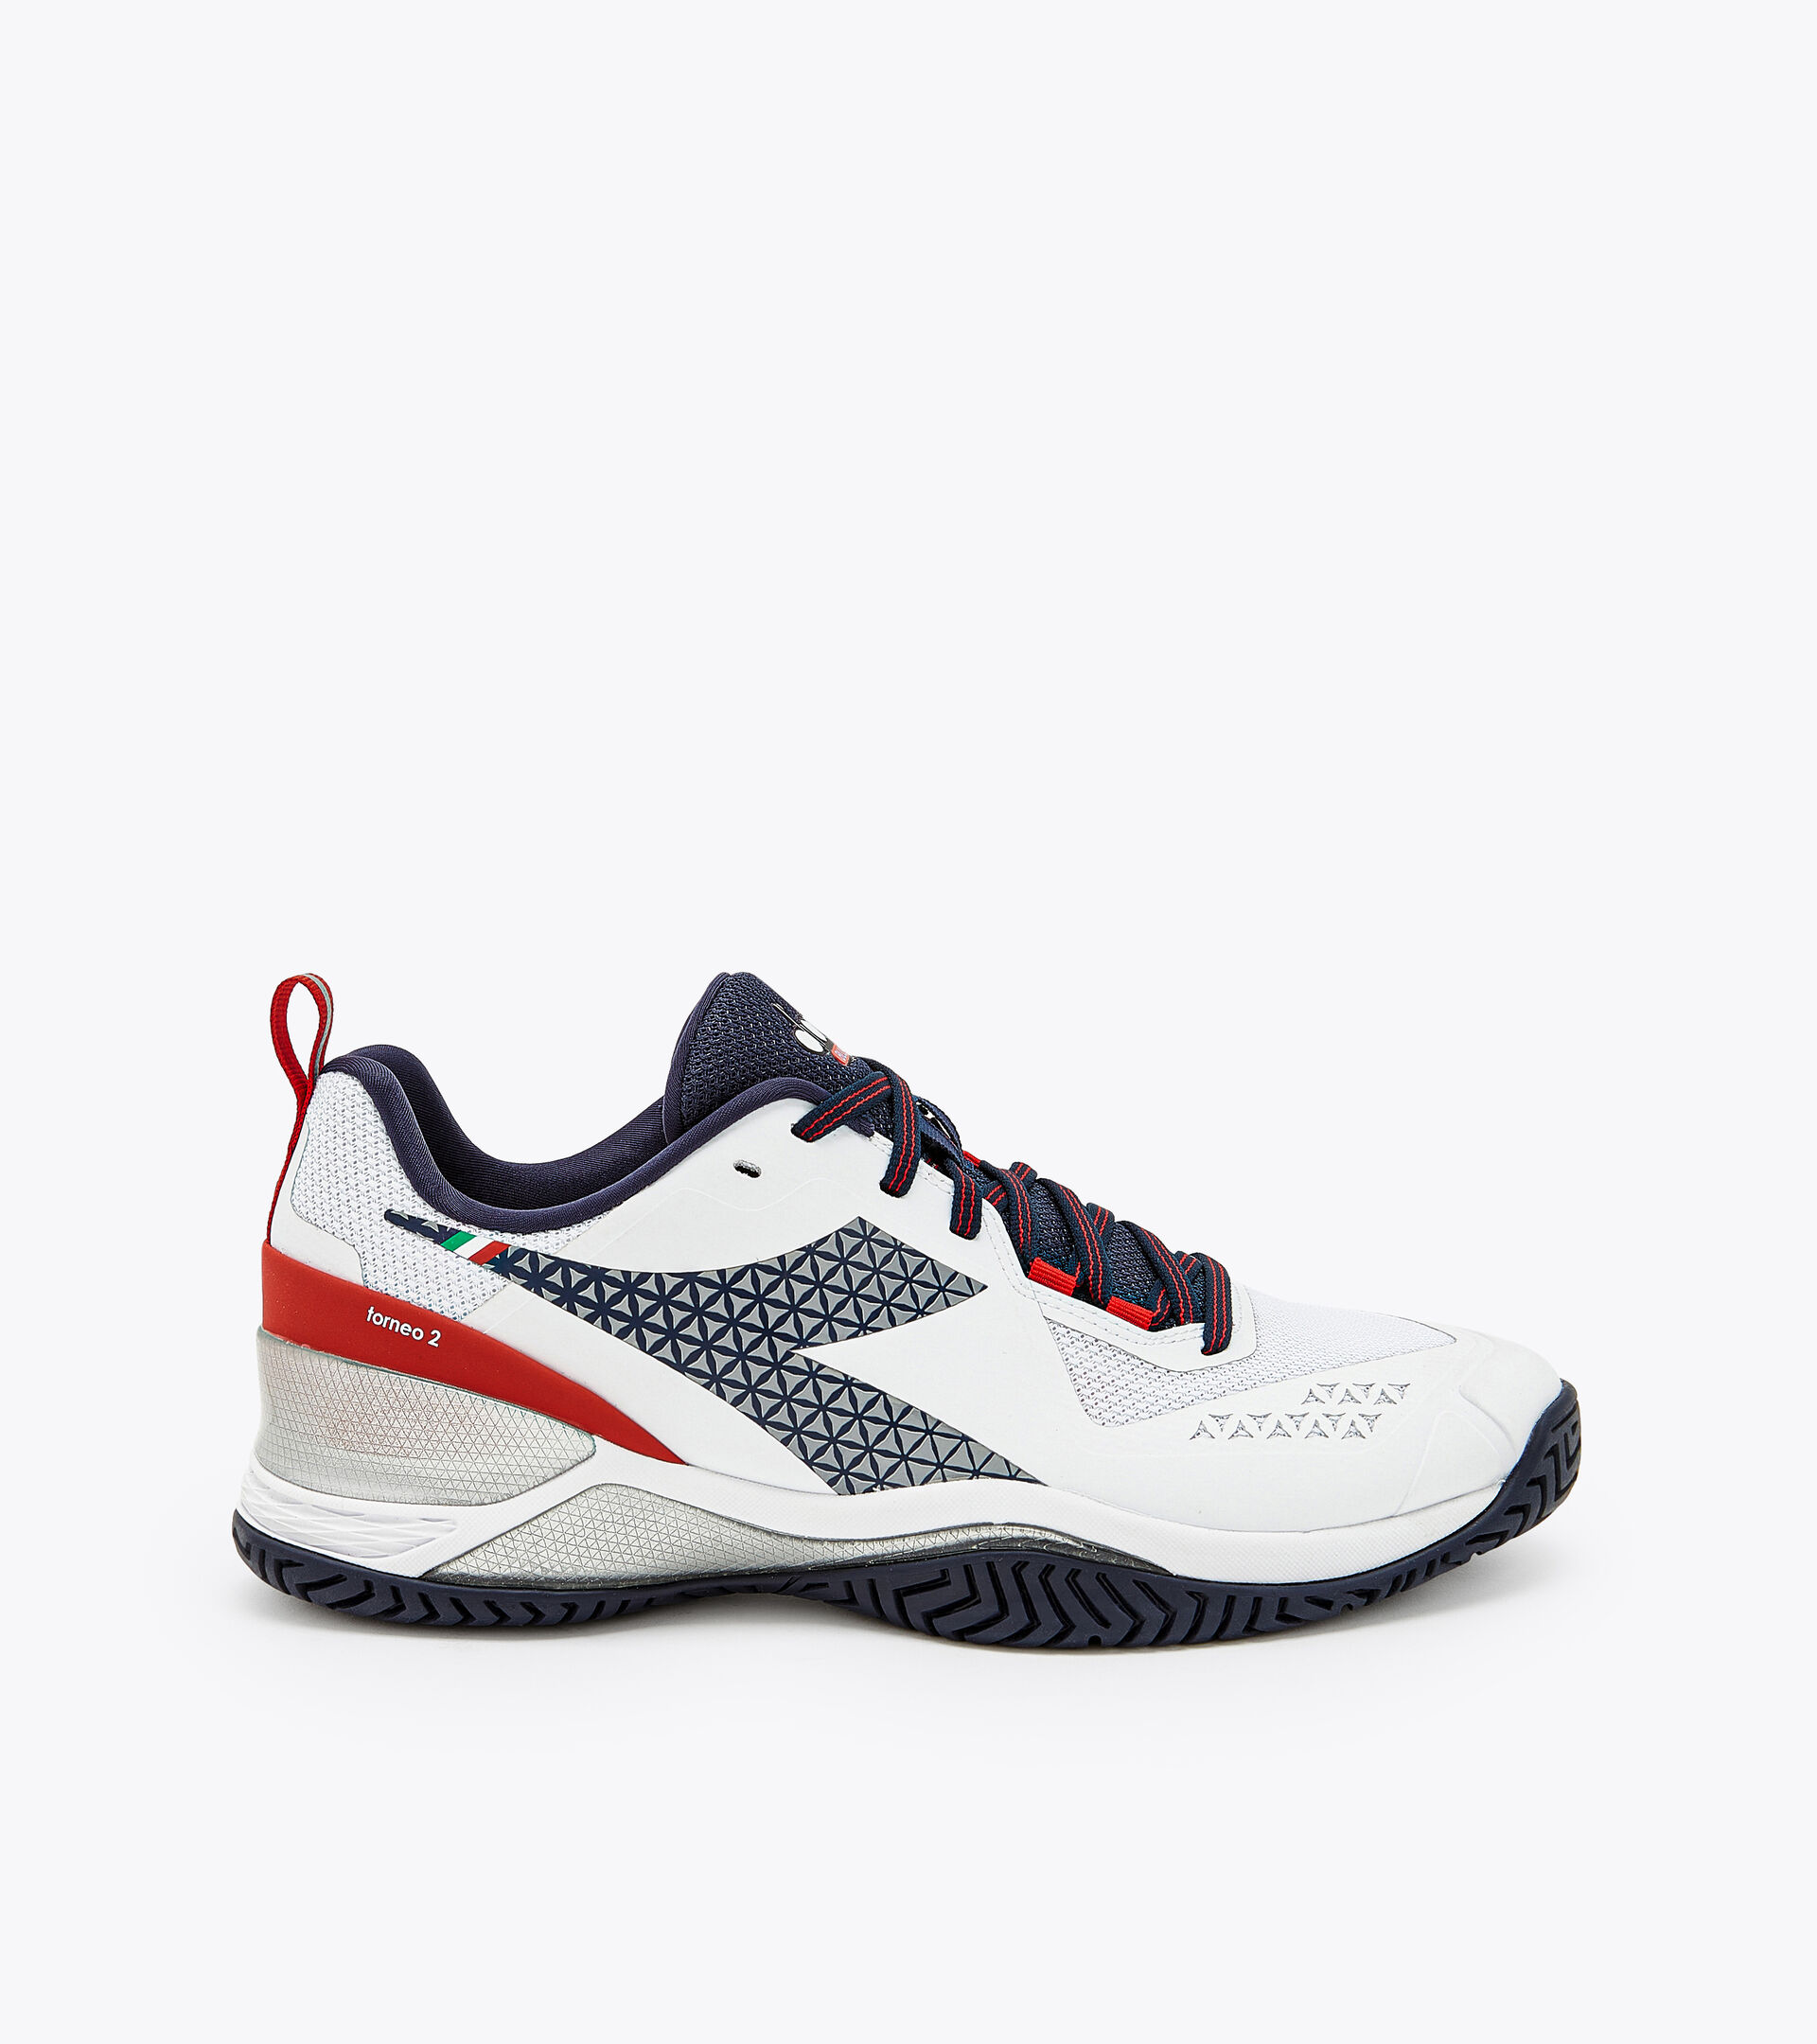 Tennis shoes for hard surfaces or clay - Men BLUSHIELD TORNEO 2 AG WHITE/BLUE CORSAIR/FIERY RED - Diadora